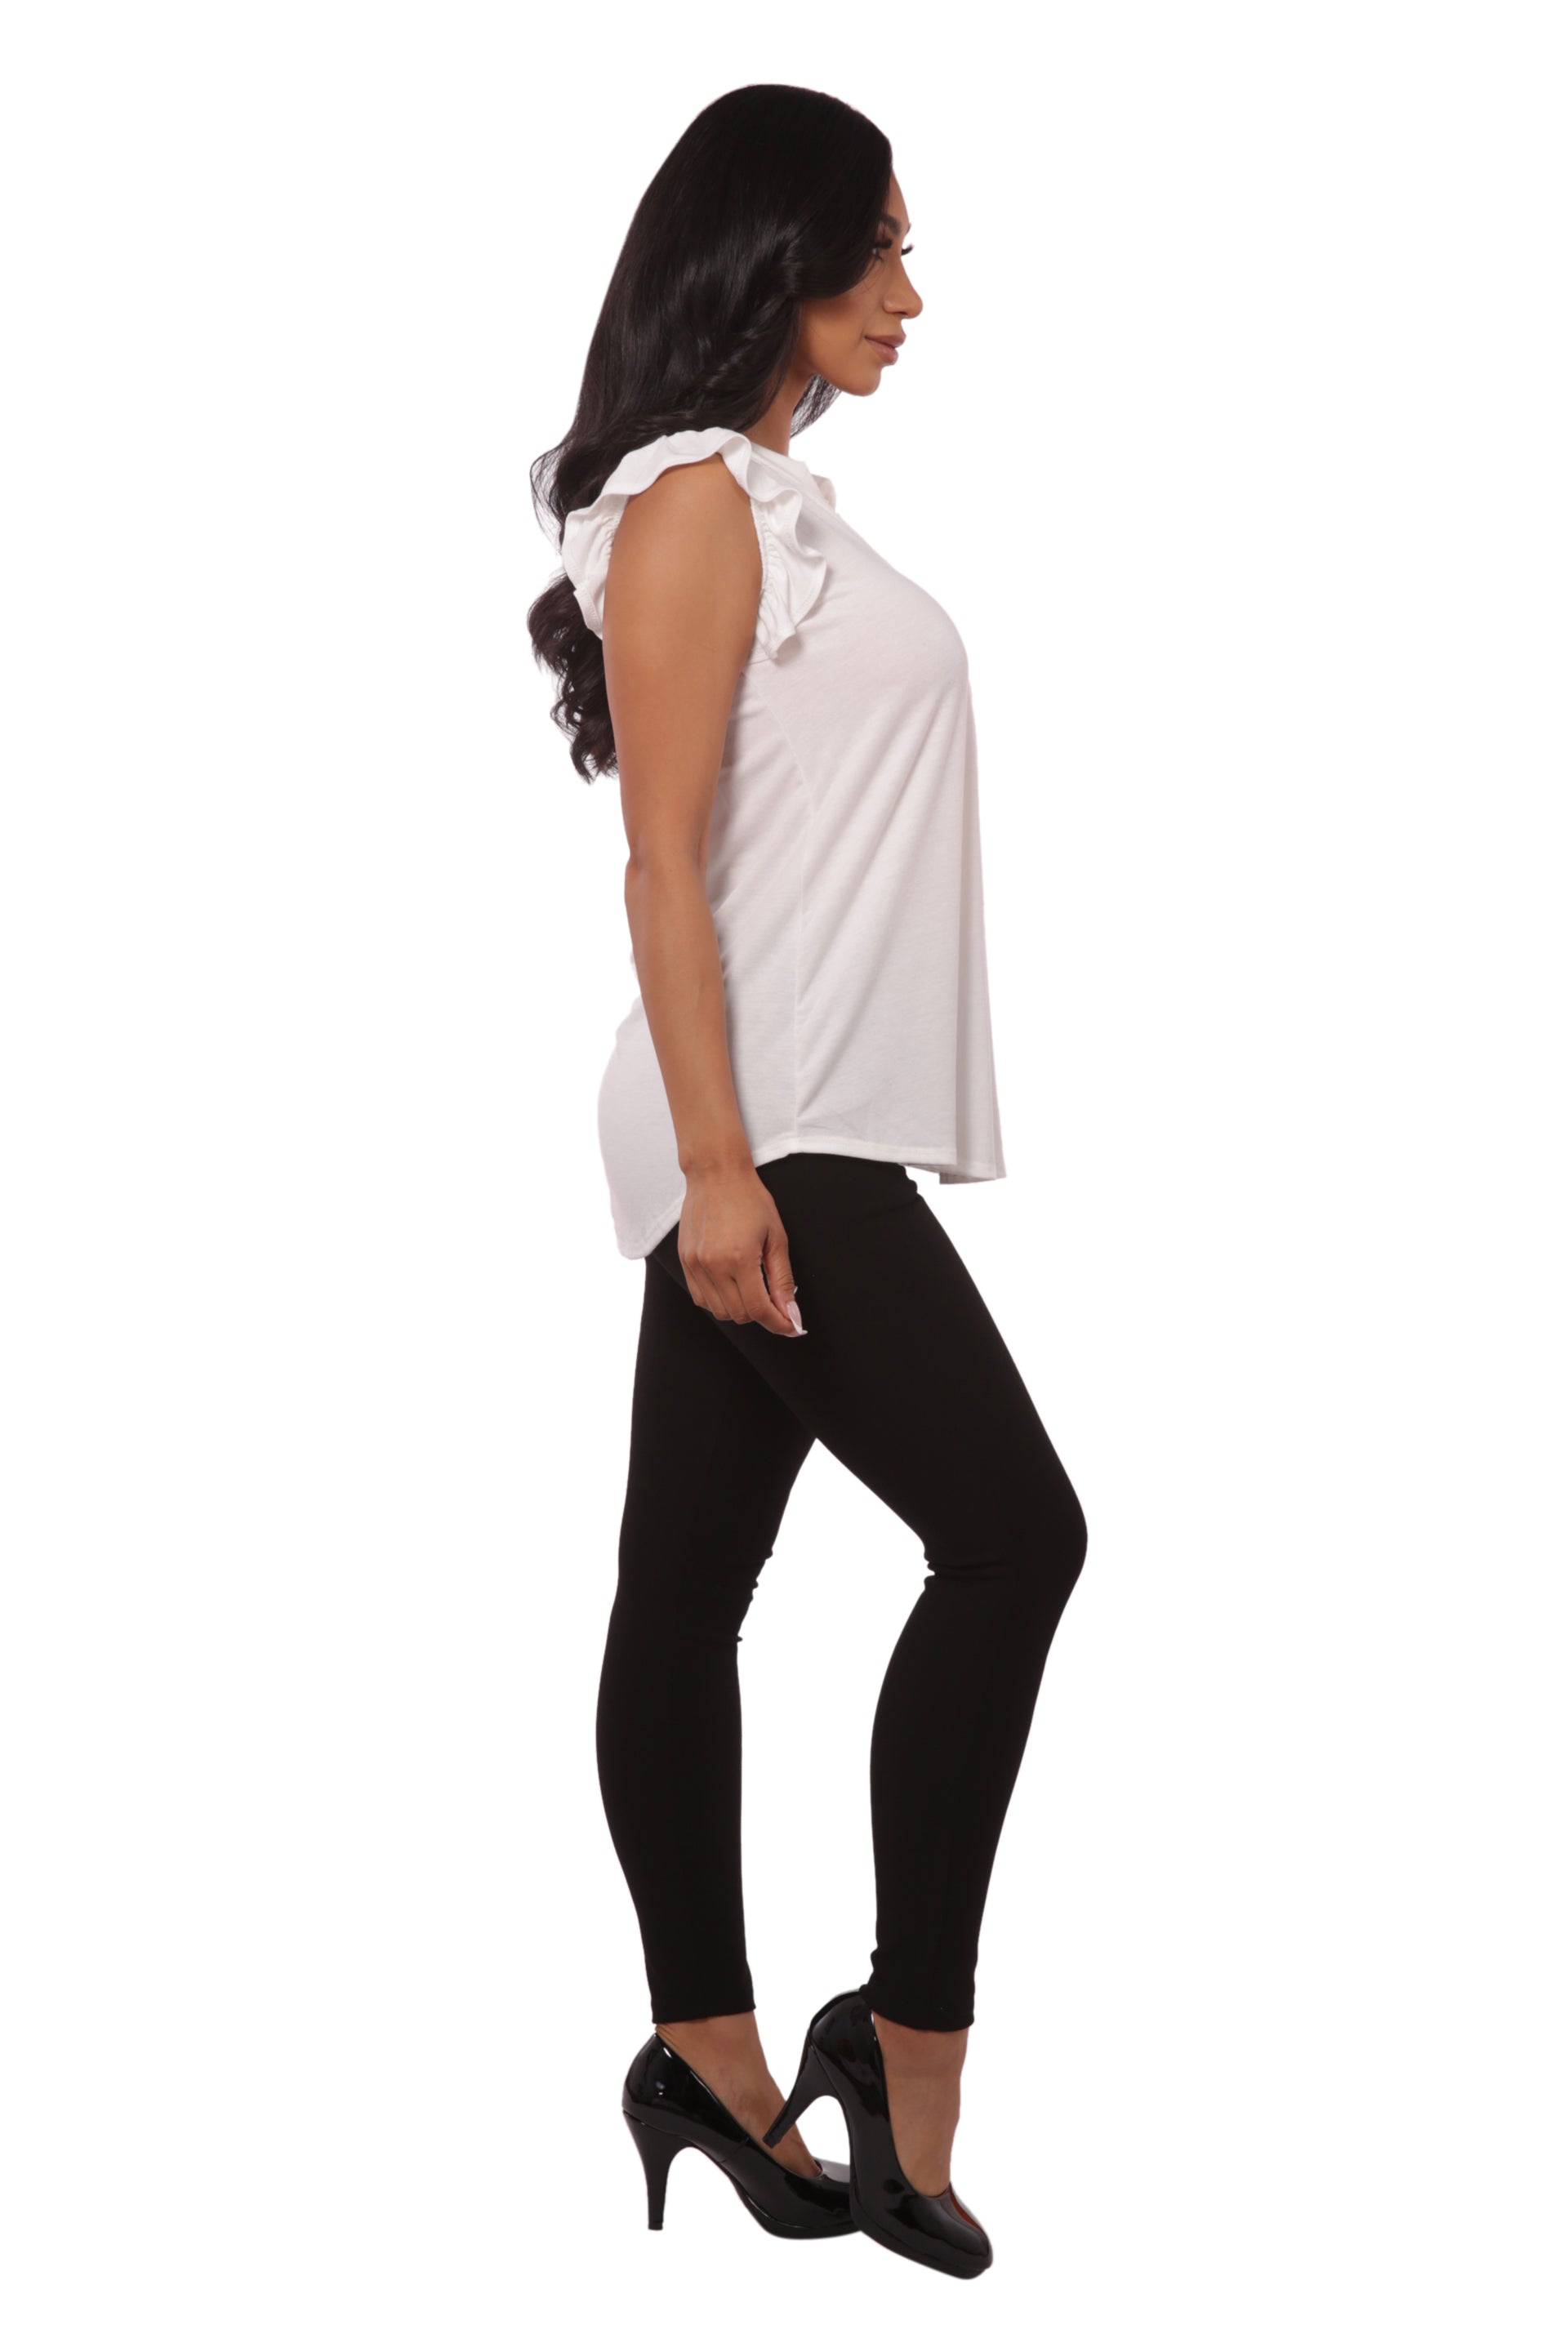 Wholesale Womens V-Neck Tops With Ruffle Armhole Detail - Ivory - S&G Apparel